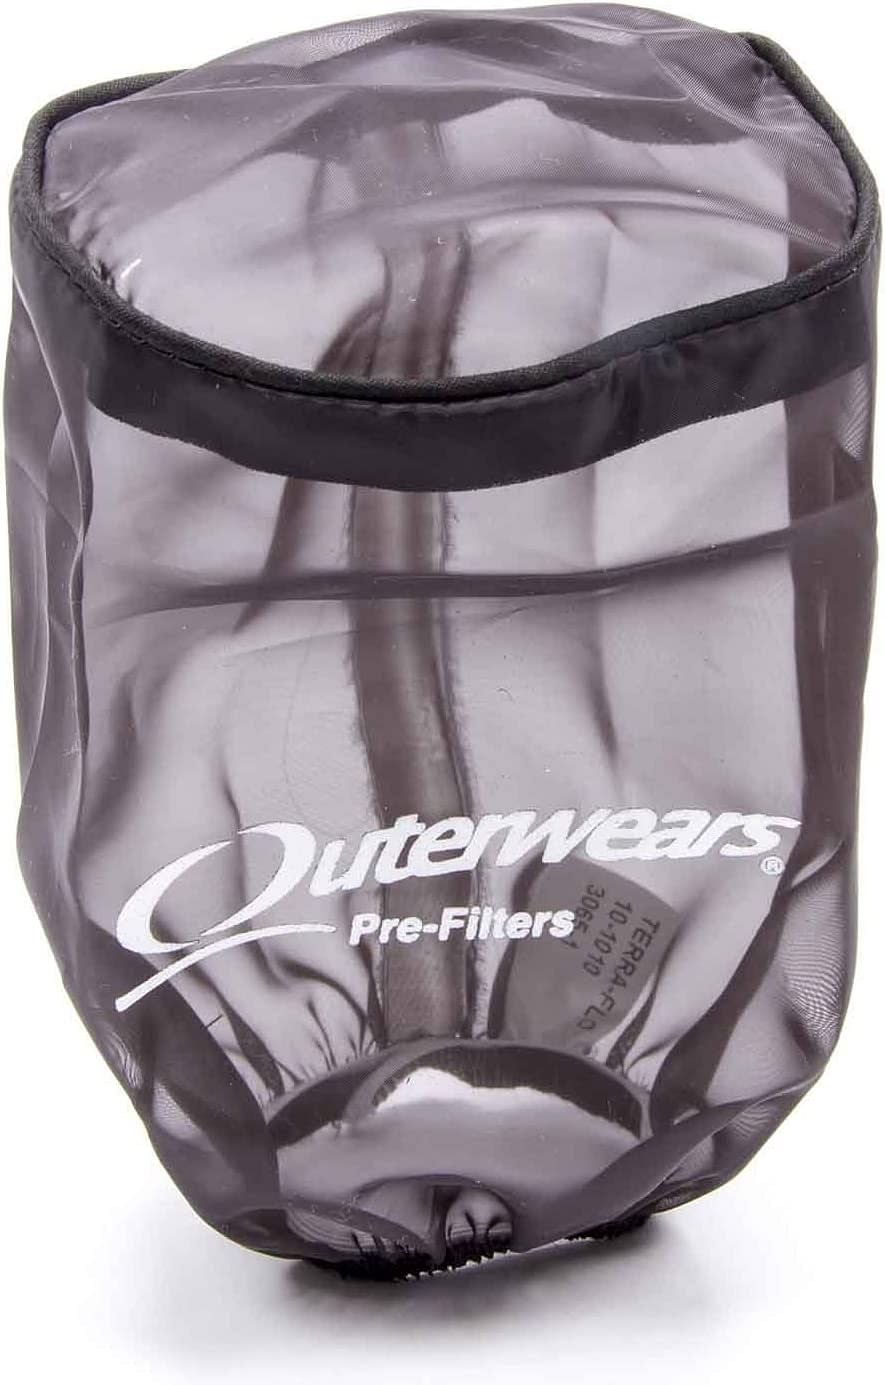 Outerwears - 10-1010-01 Pre Filter For K&N Air Filter - Fits: Yamaha RAPTOR 700 2006-2019